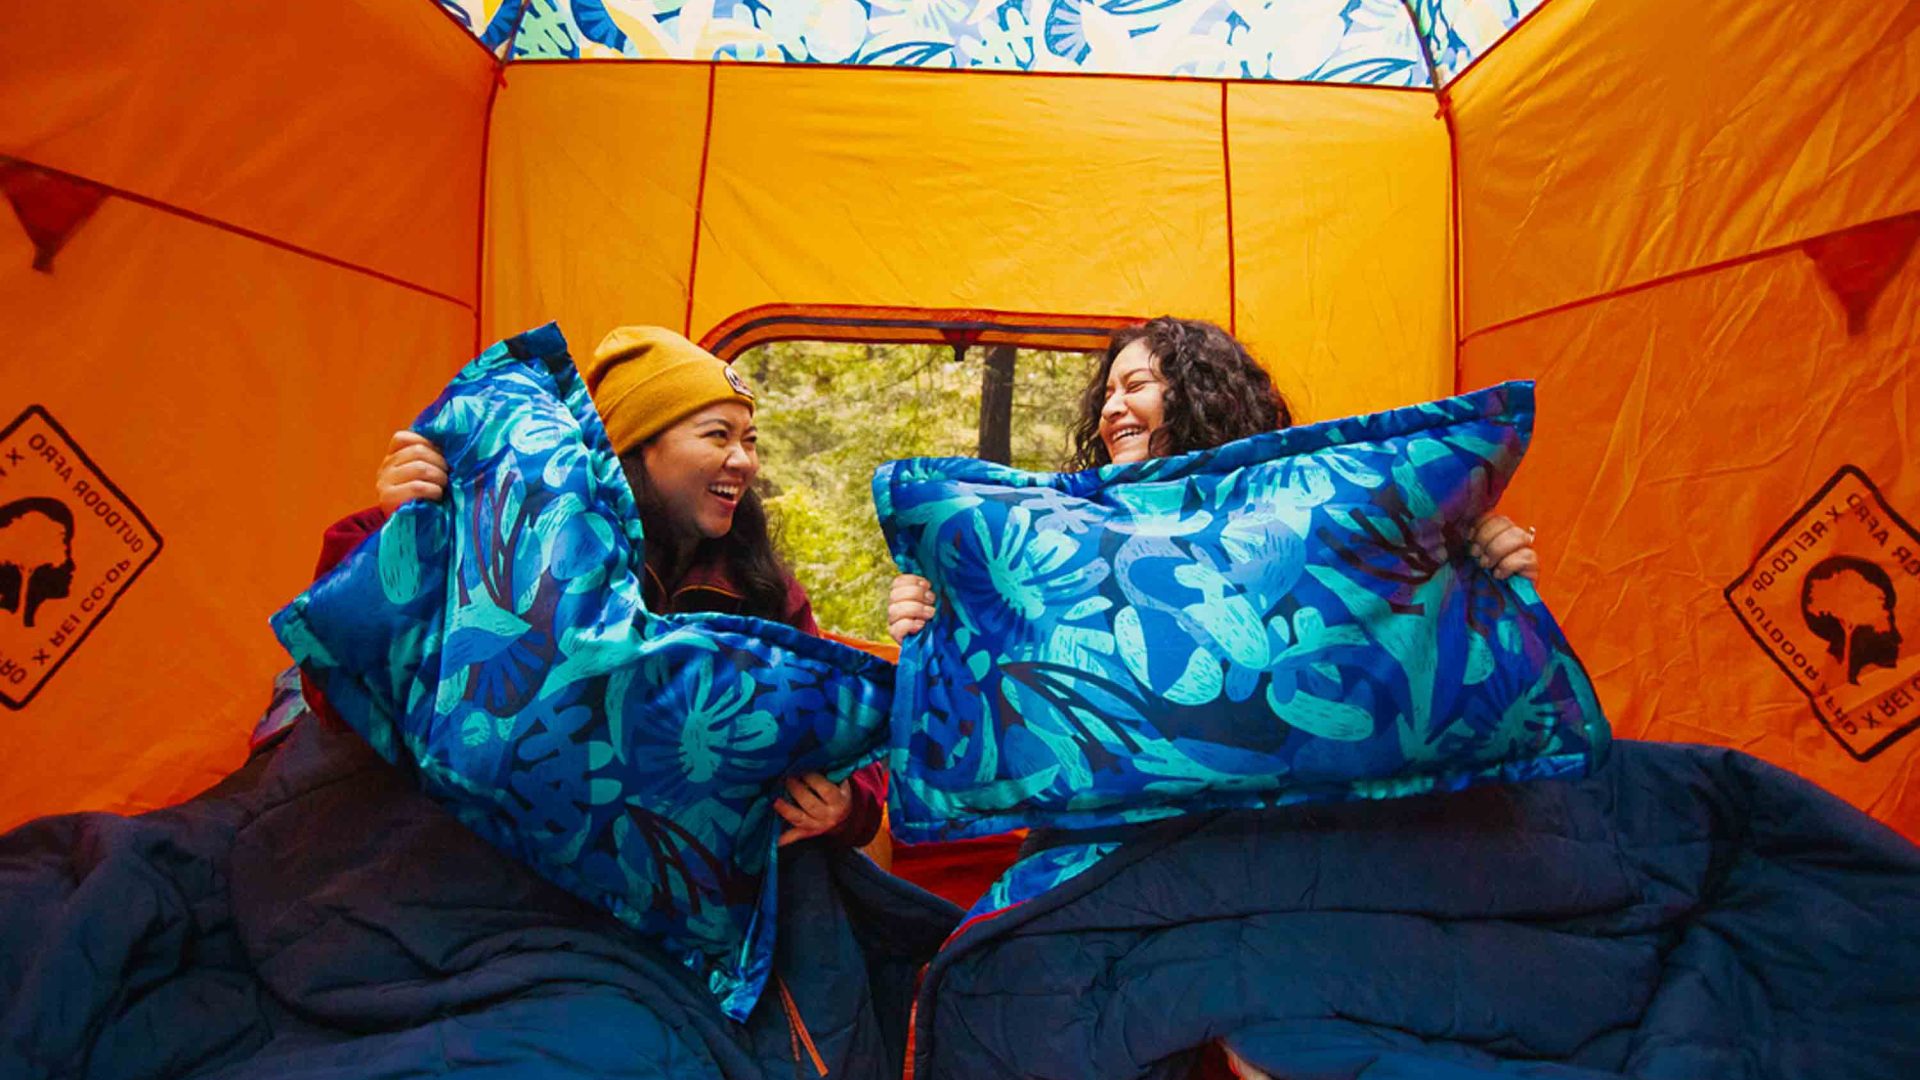 Two people in a tent hold pillows and smile at each other.